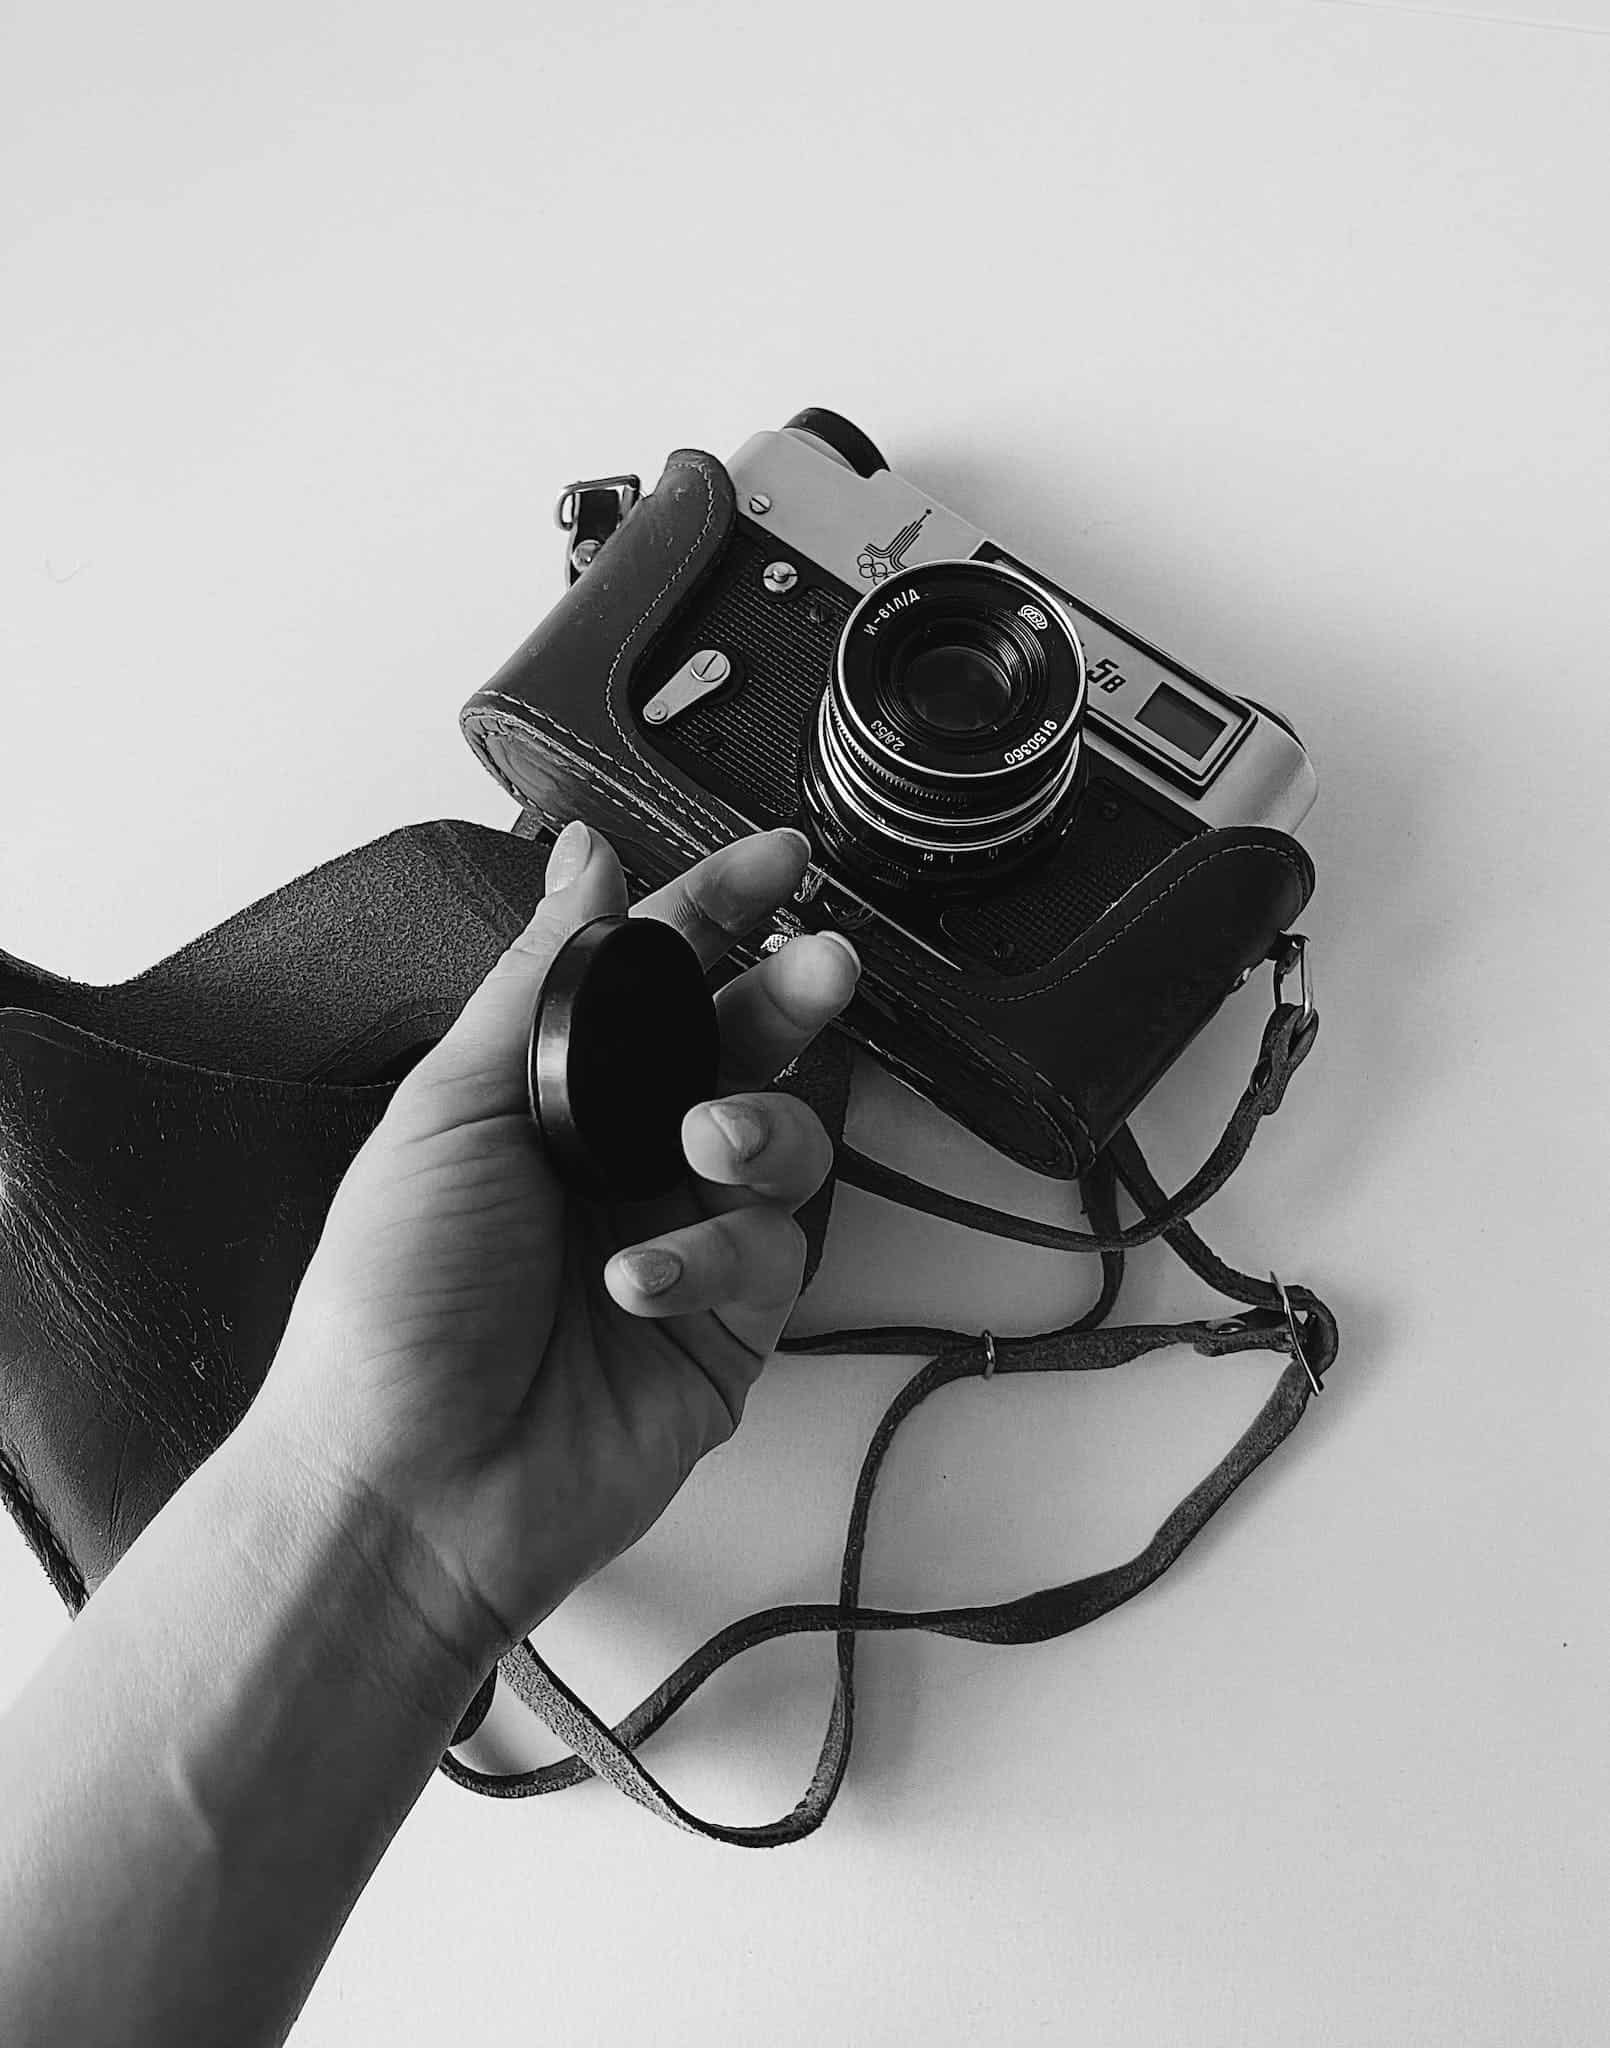 From above of faceless person holding lens cap above analog photo camera in leather case on white table